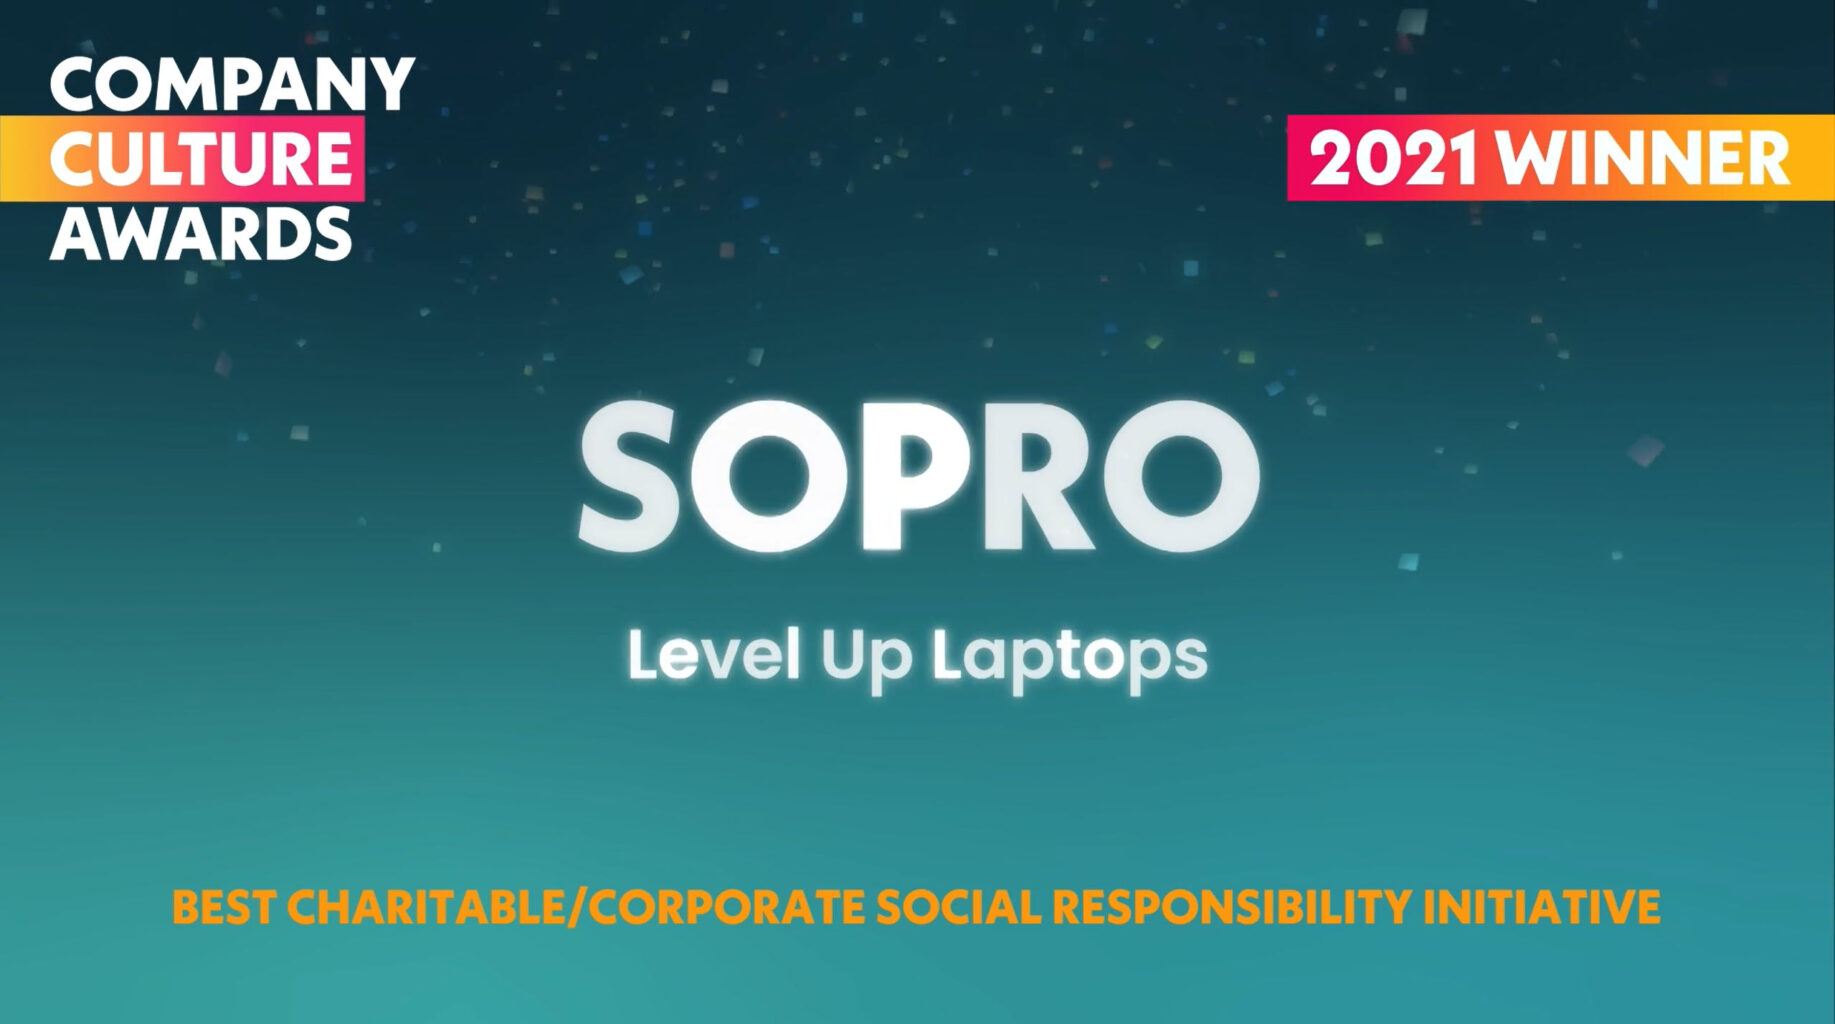 Sopro named winners at Company Culture Awards